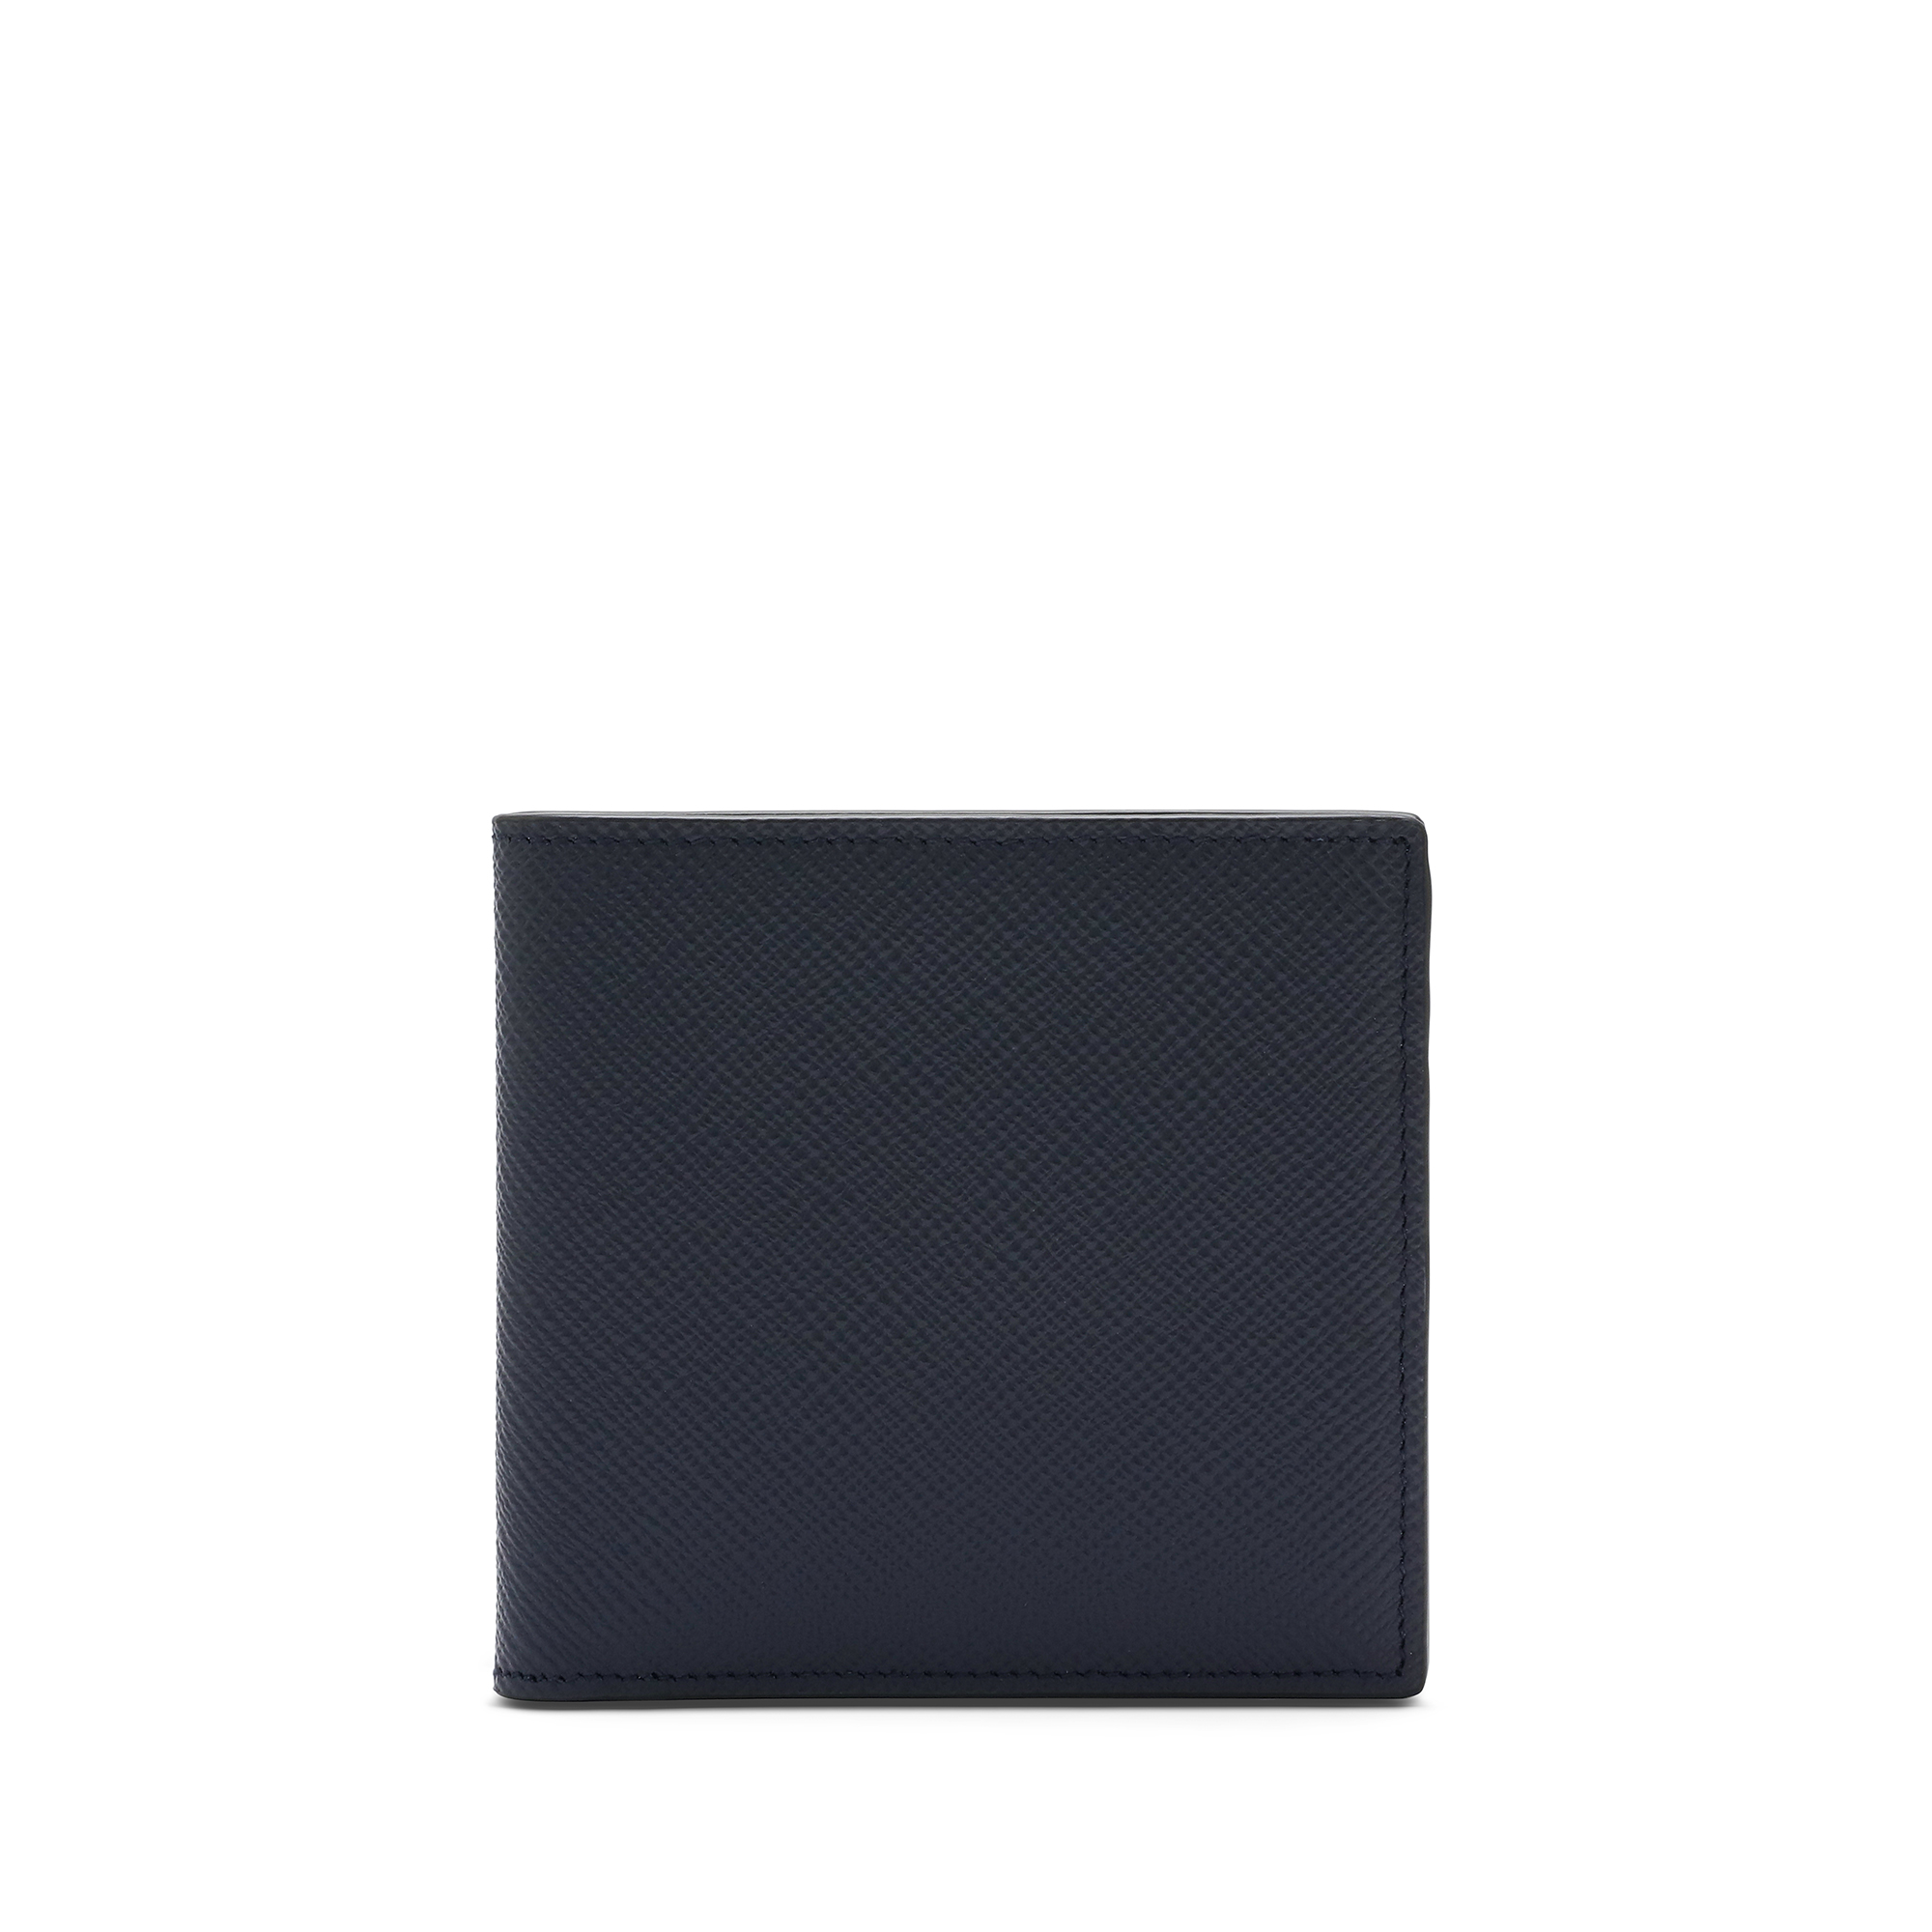 8 Card Slot Wallet in Panama in navy | Smythson